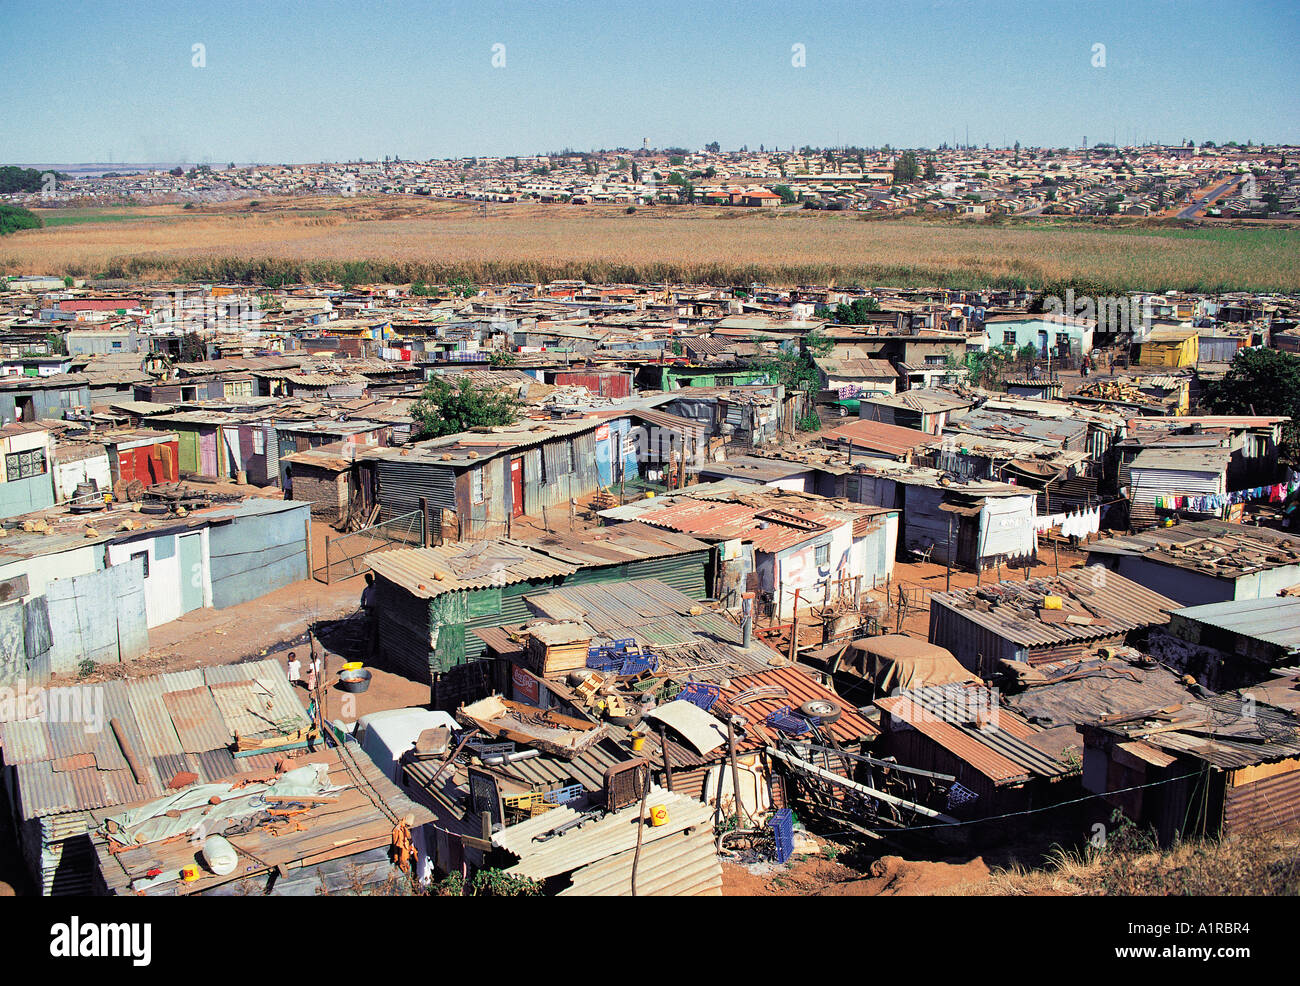 Homes in shanty town area of Soweto near Johannesburg South Africa Stock Photo